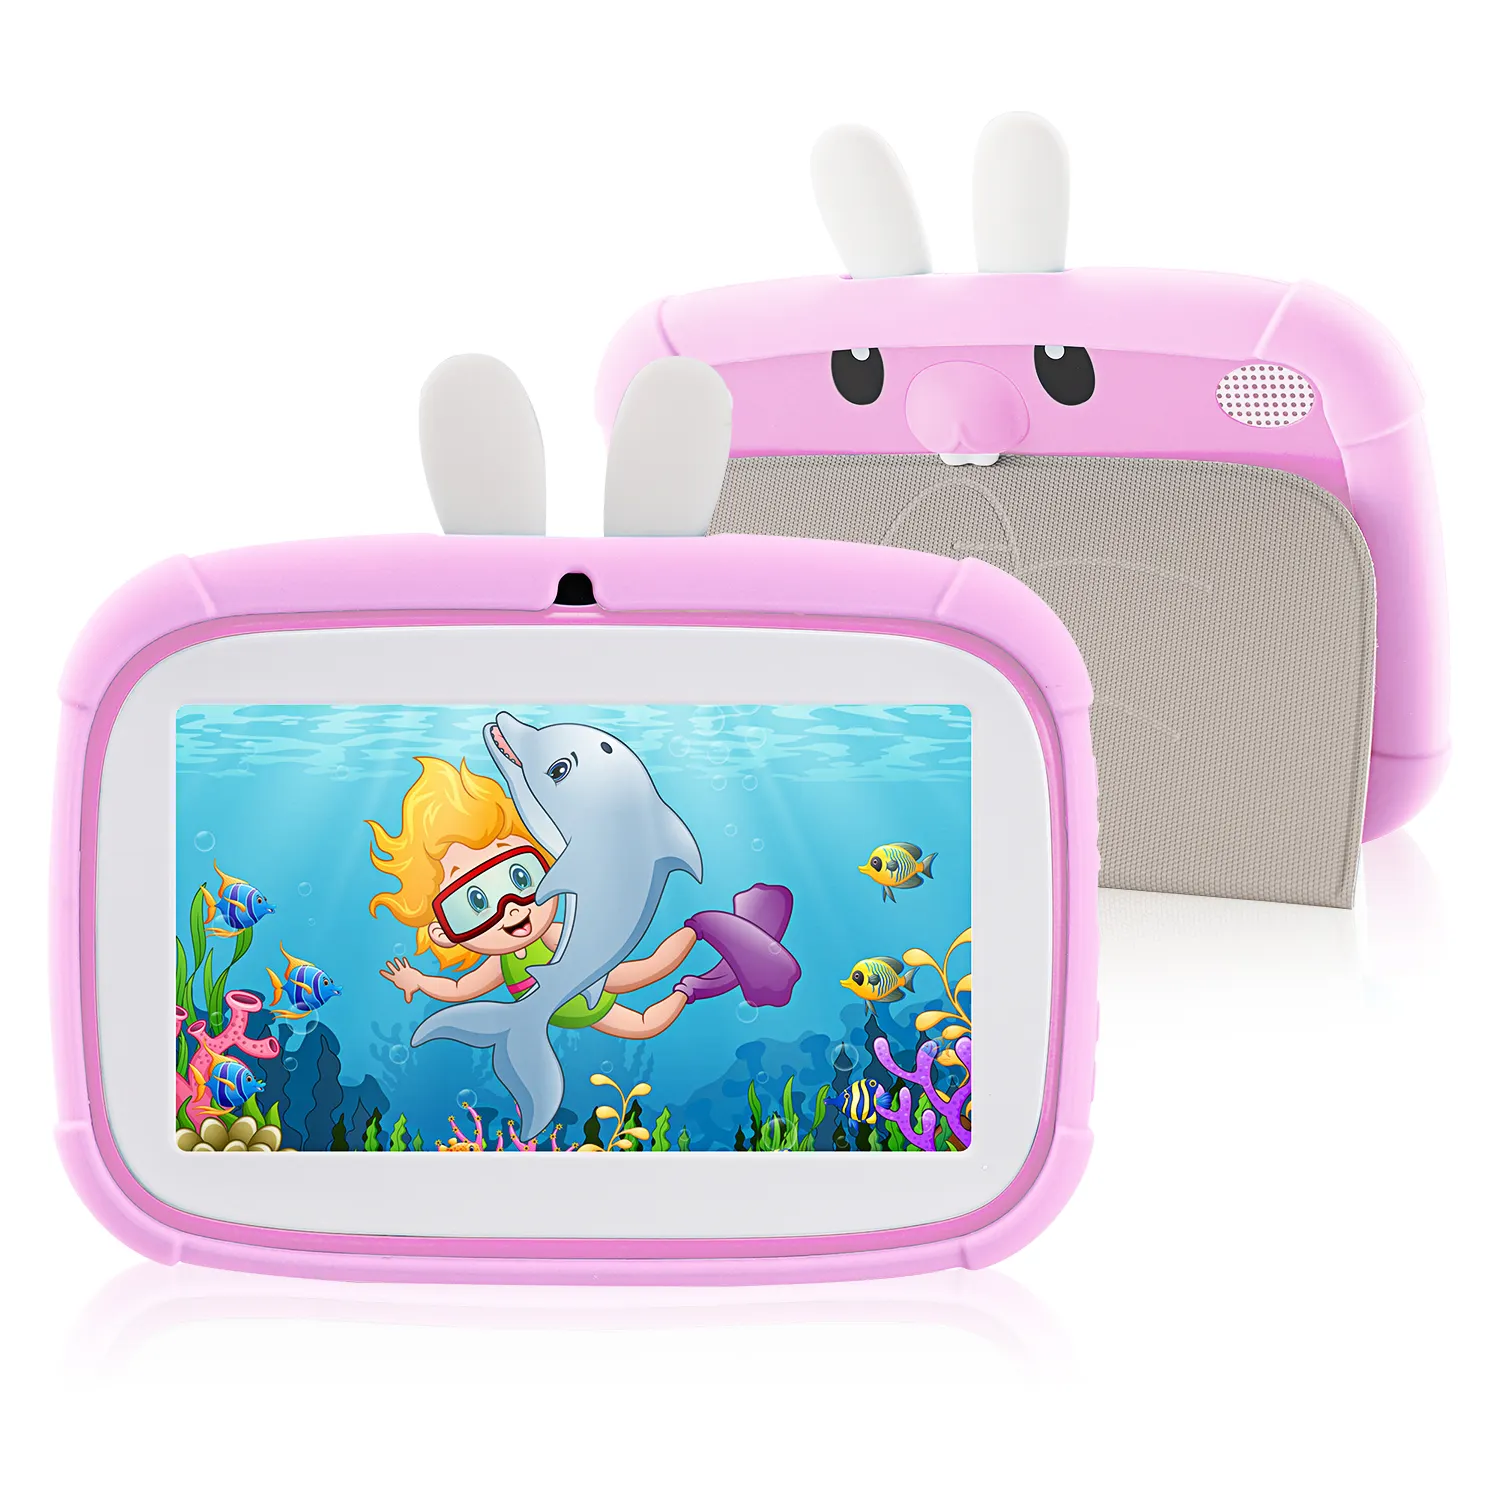 Kids Tablet 7 inch Android 10 GO 32GB IPS Security Screen WiFi Tablet Pc For Toddler Parental Controls Pre-Installed Kids App